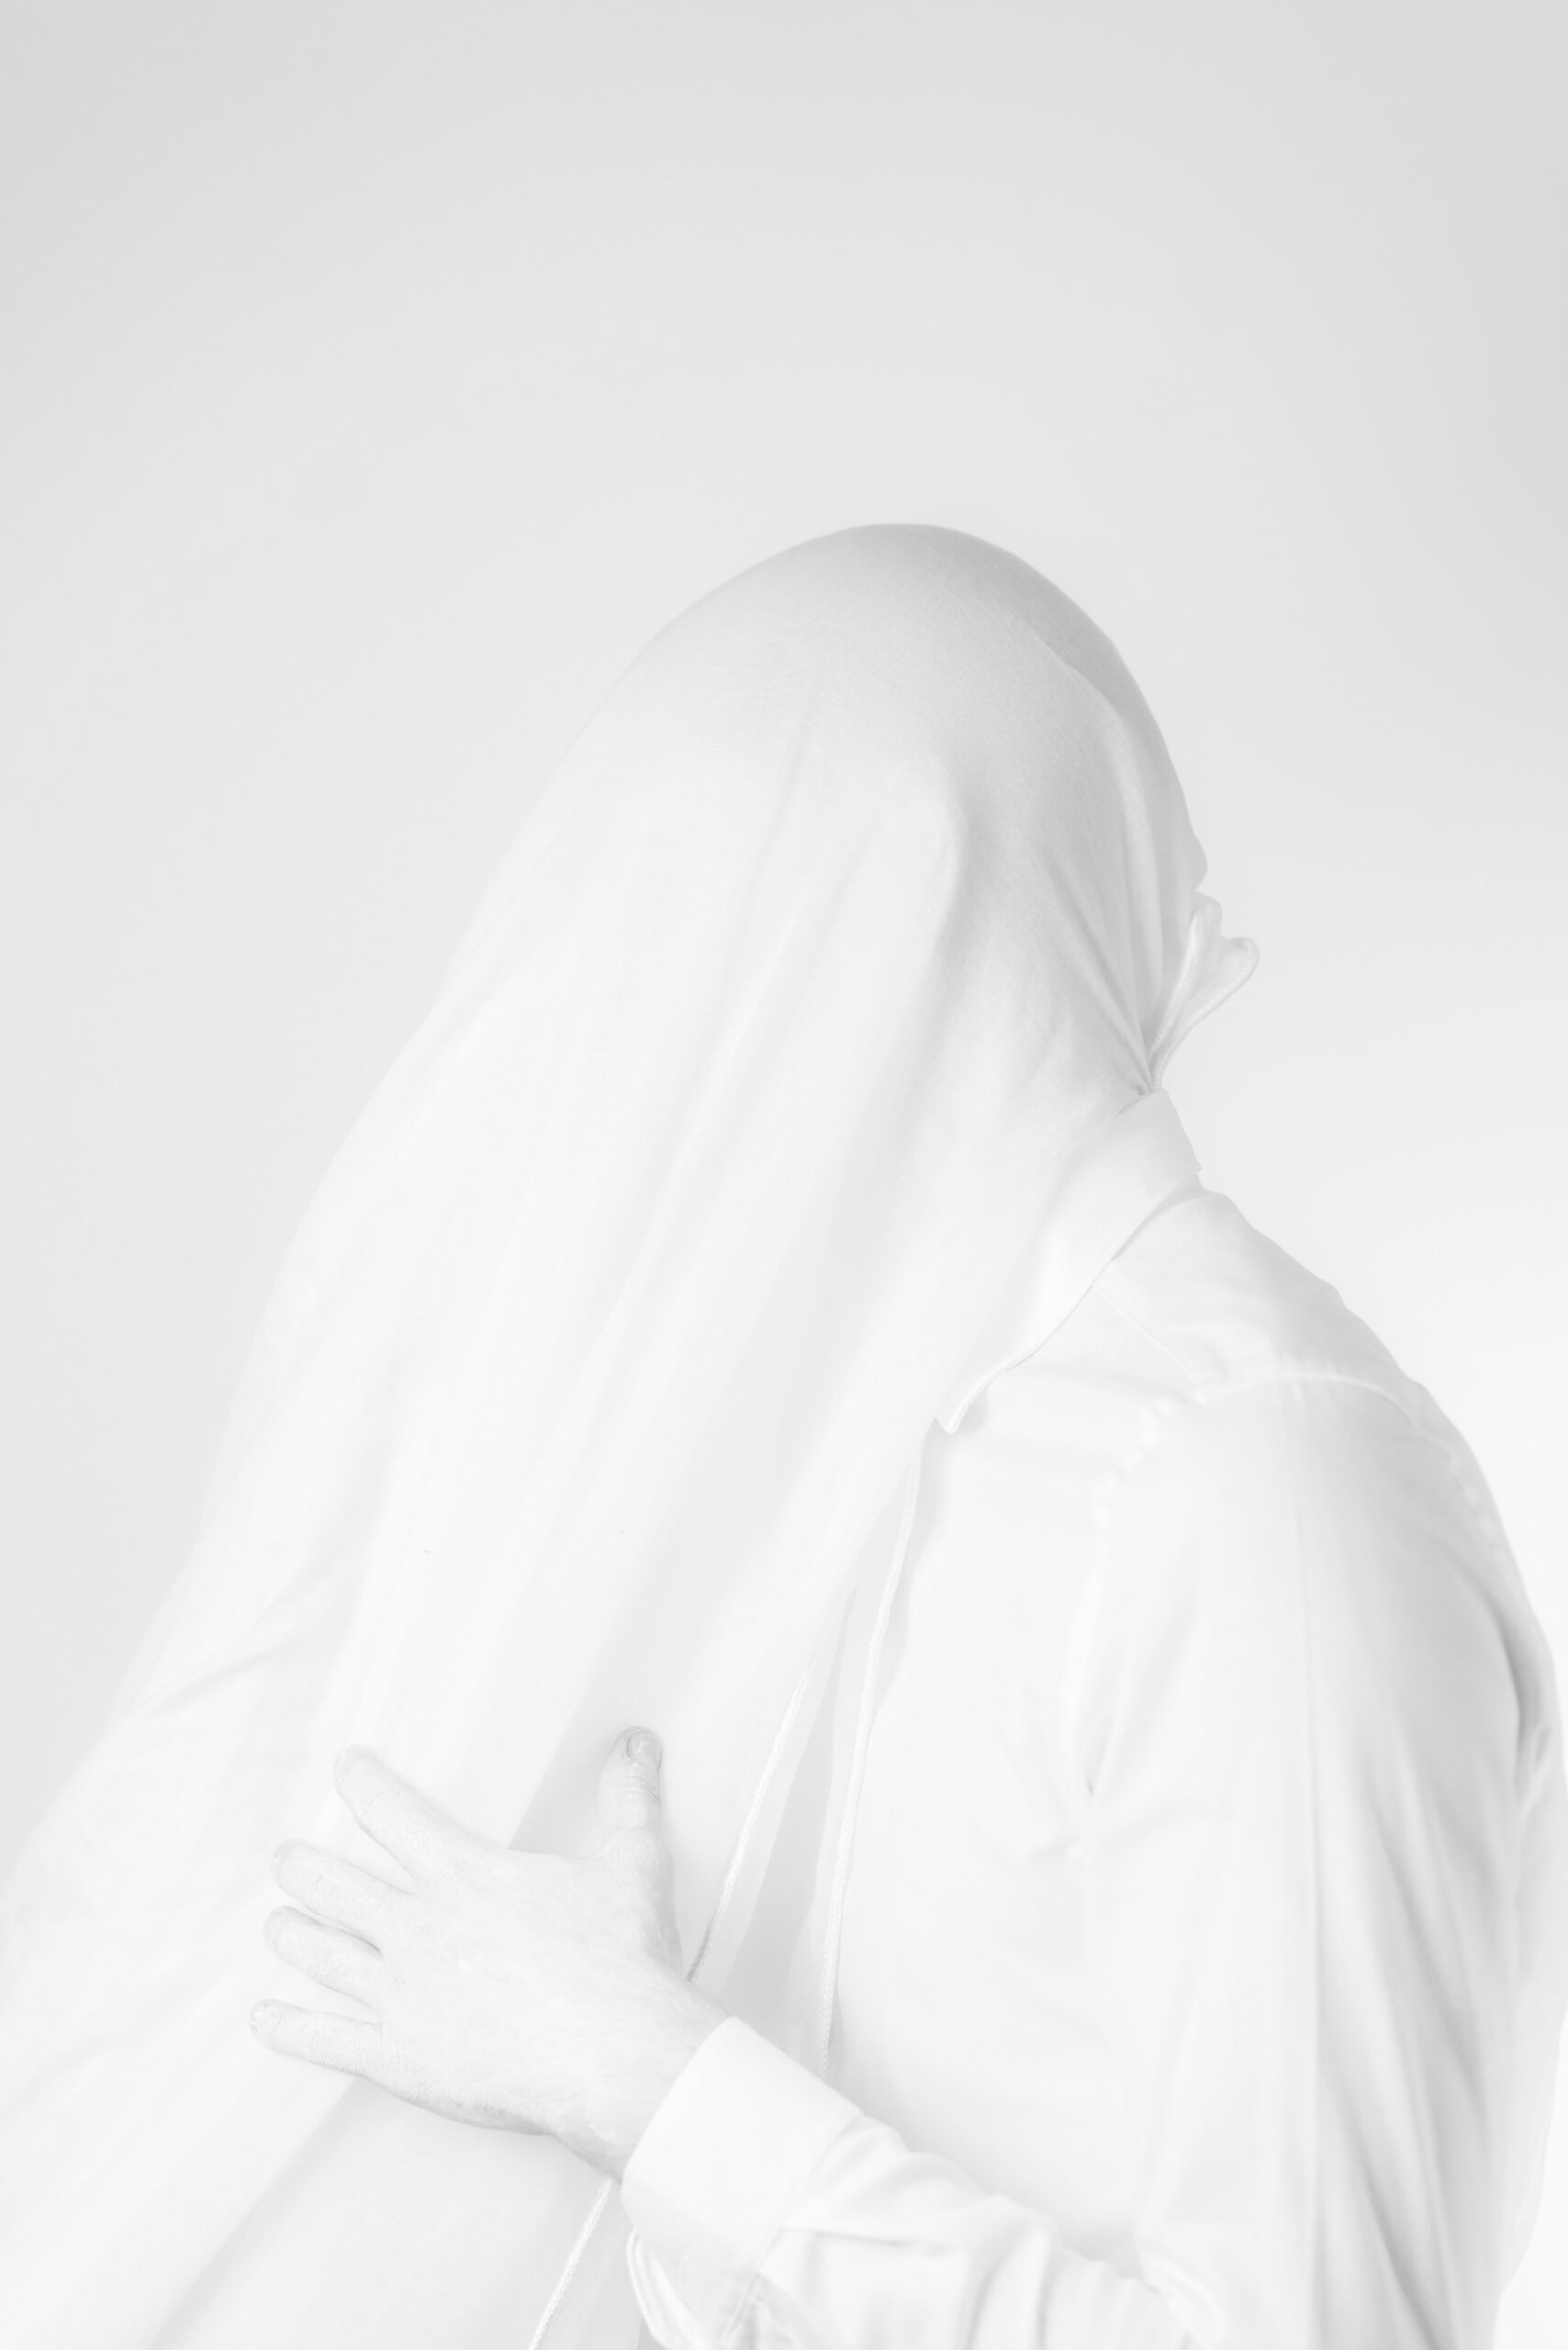 A person veiled in white fabric in front of a matching background.